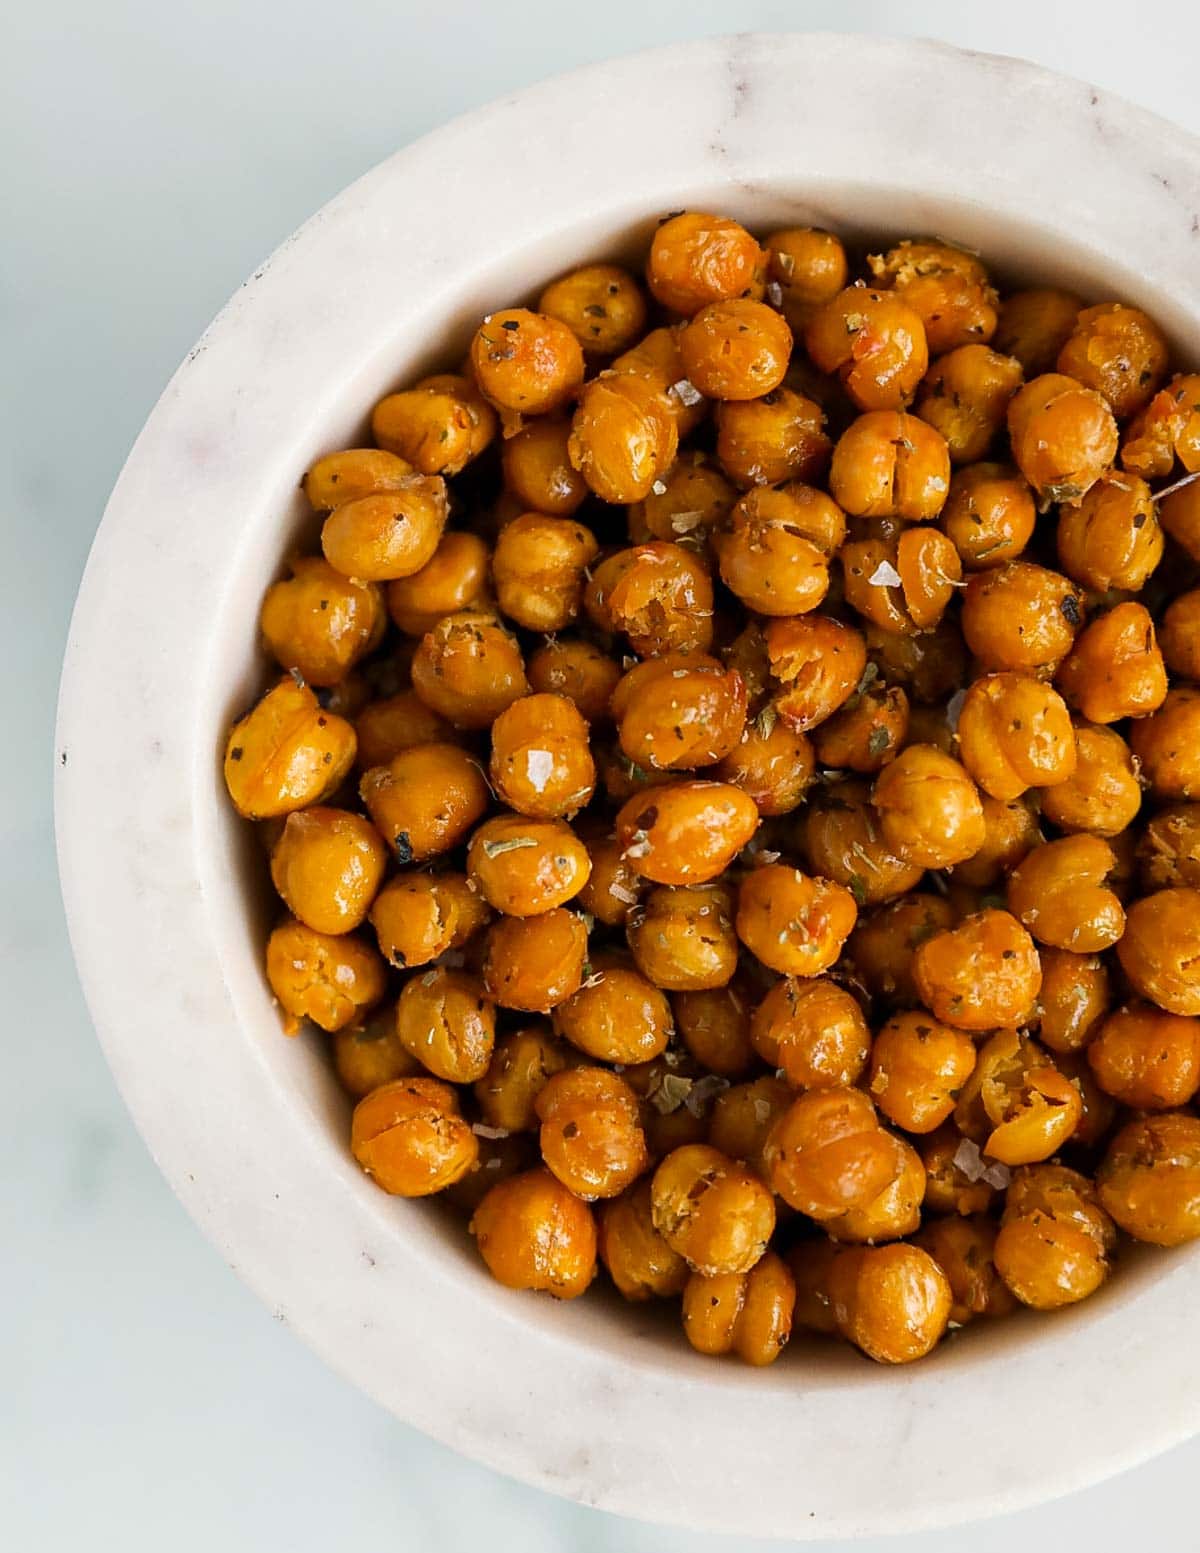 A close up image of roasted chickpeas in a white bowl